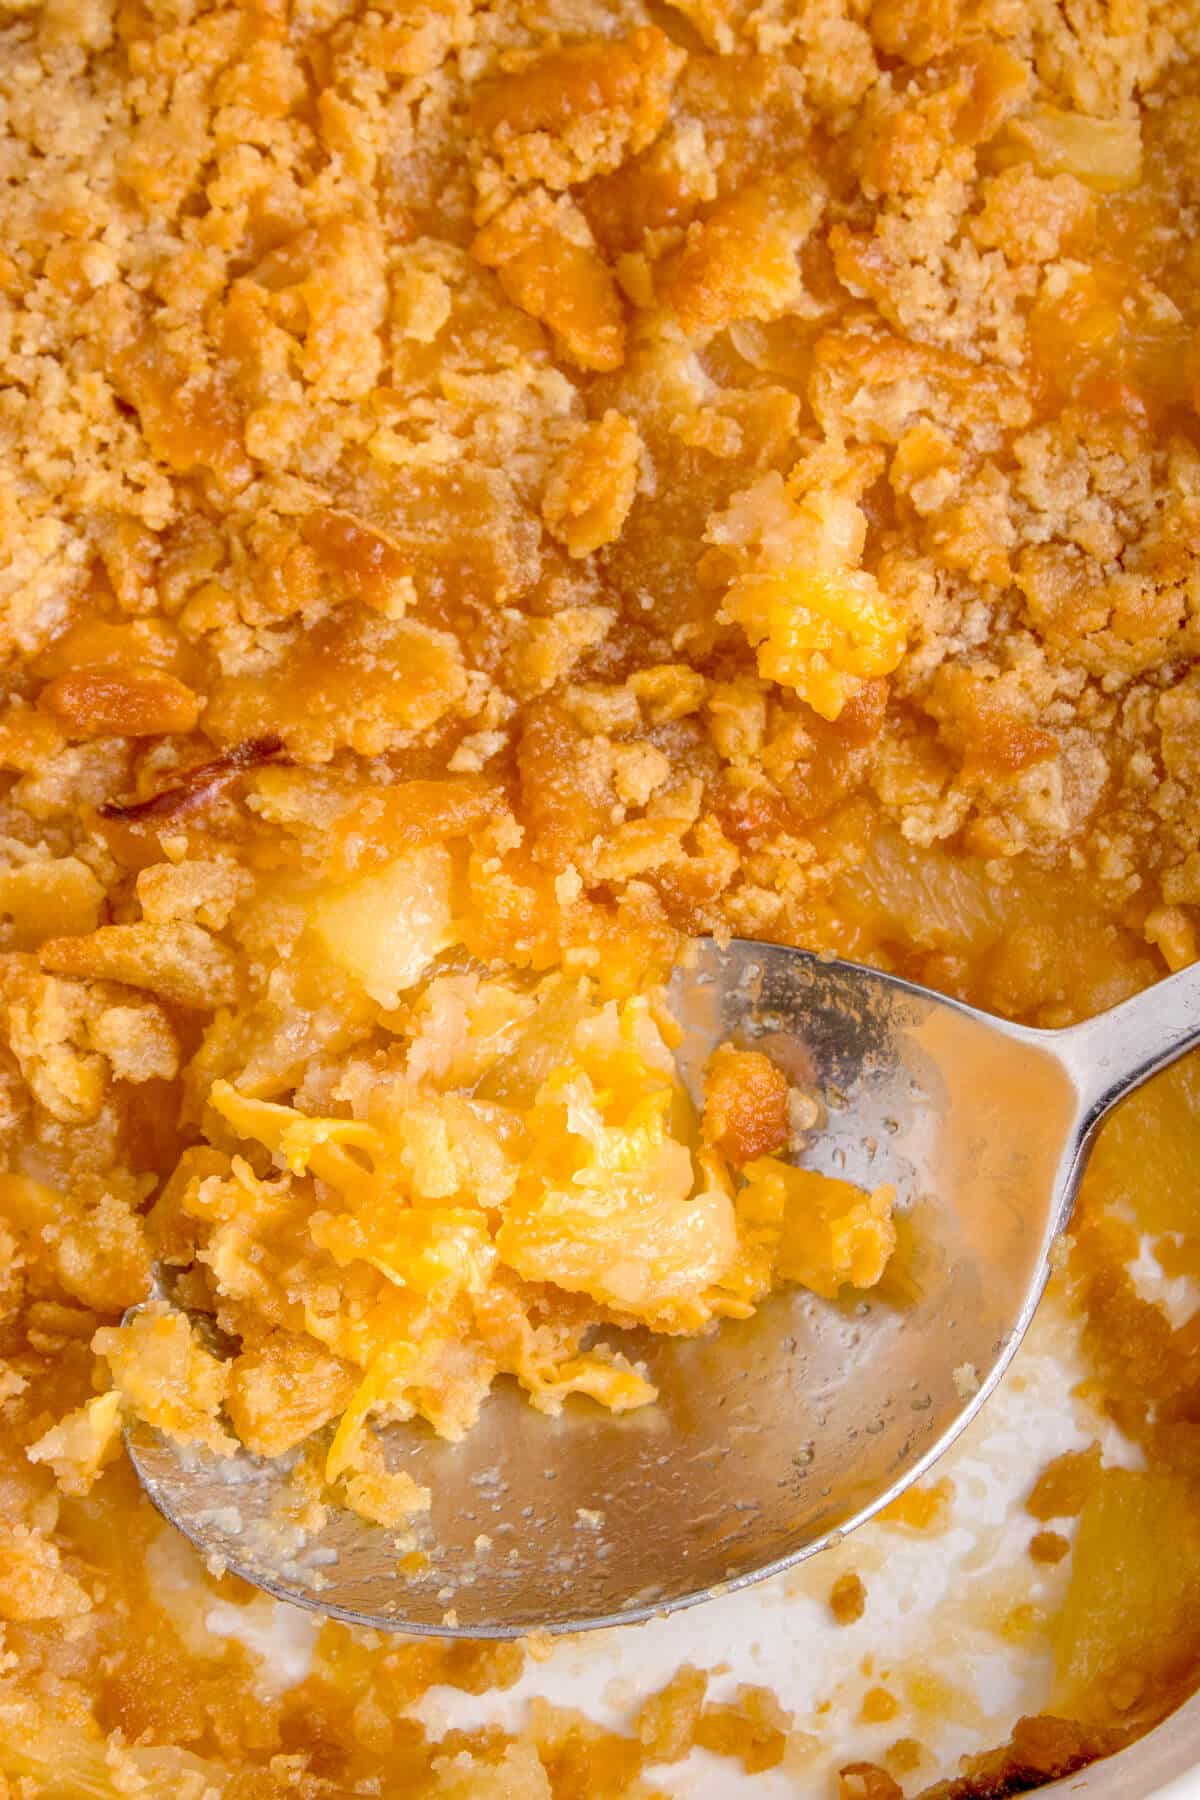 A serving spoon in a pan of pineapple casserole.